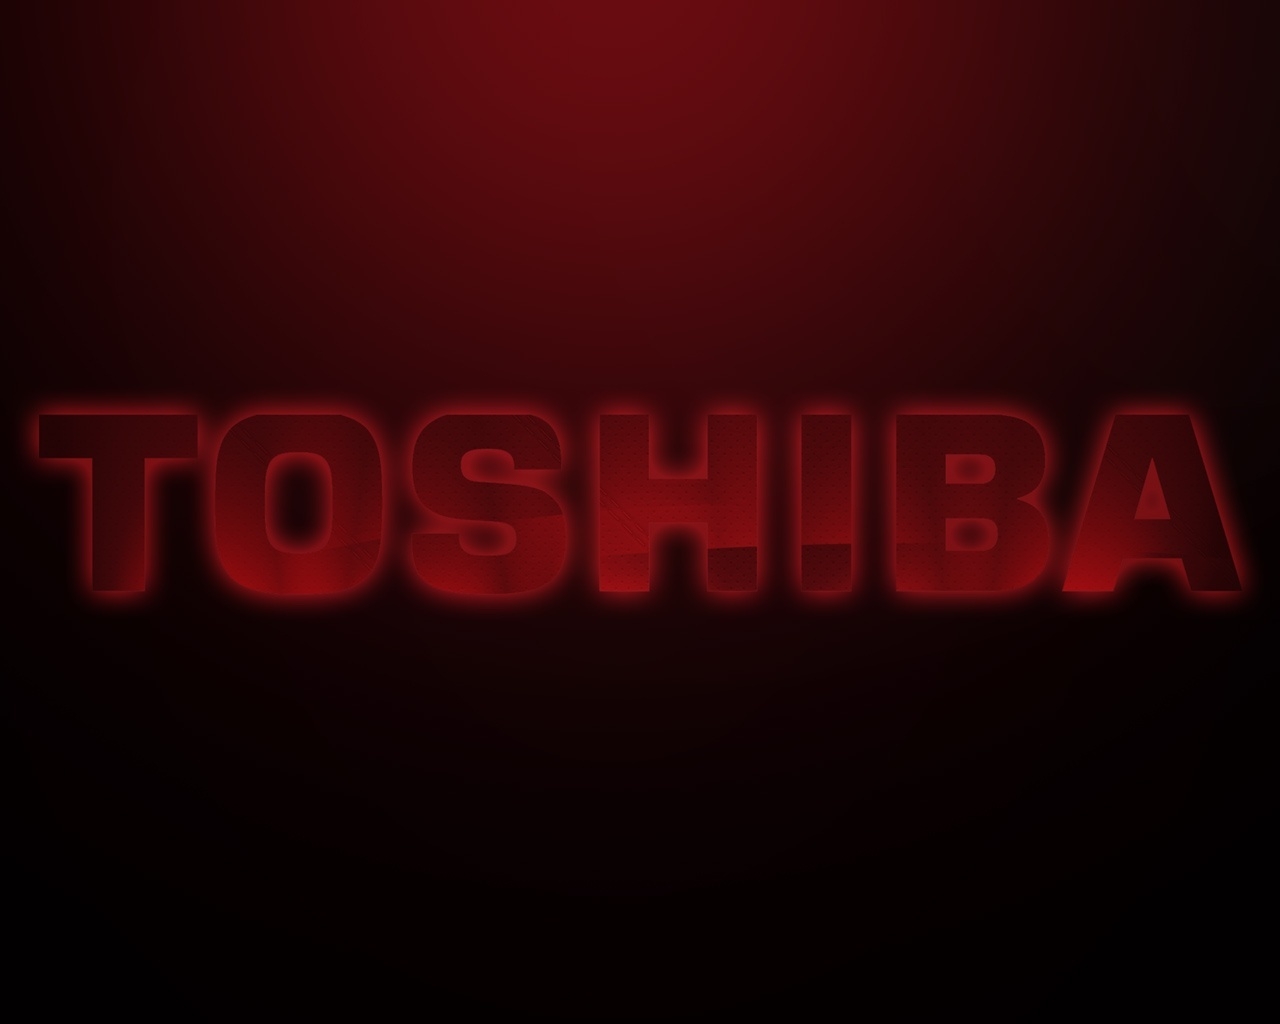 Toshiba red style for 1280 x 1024 resolution